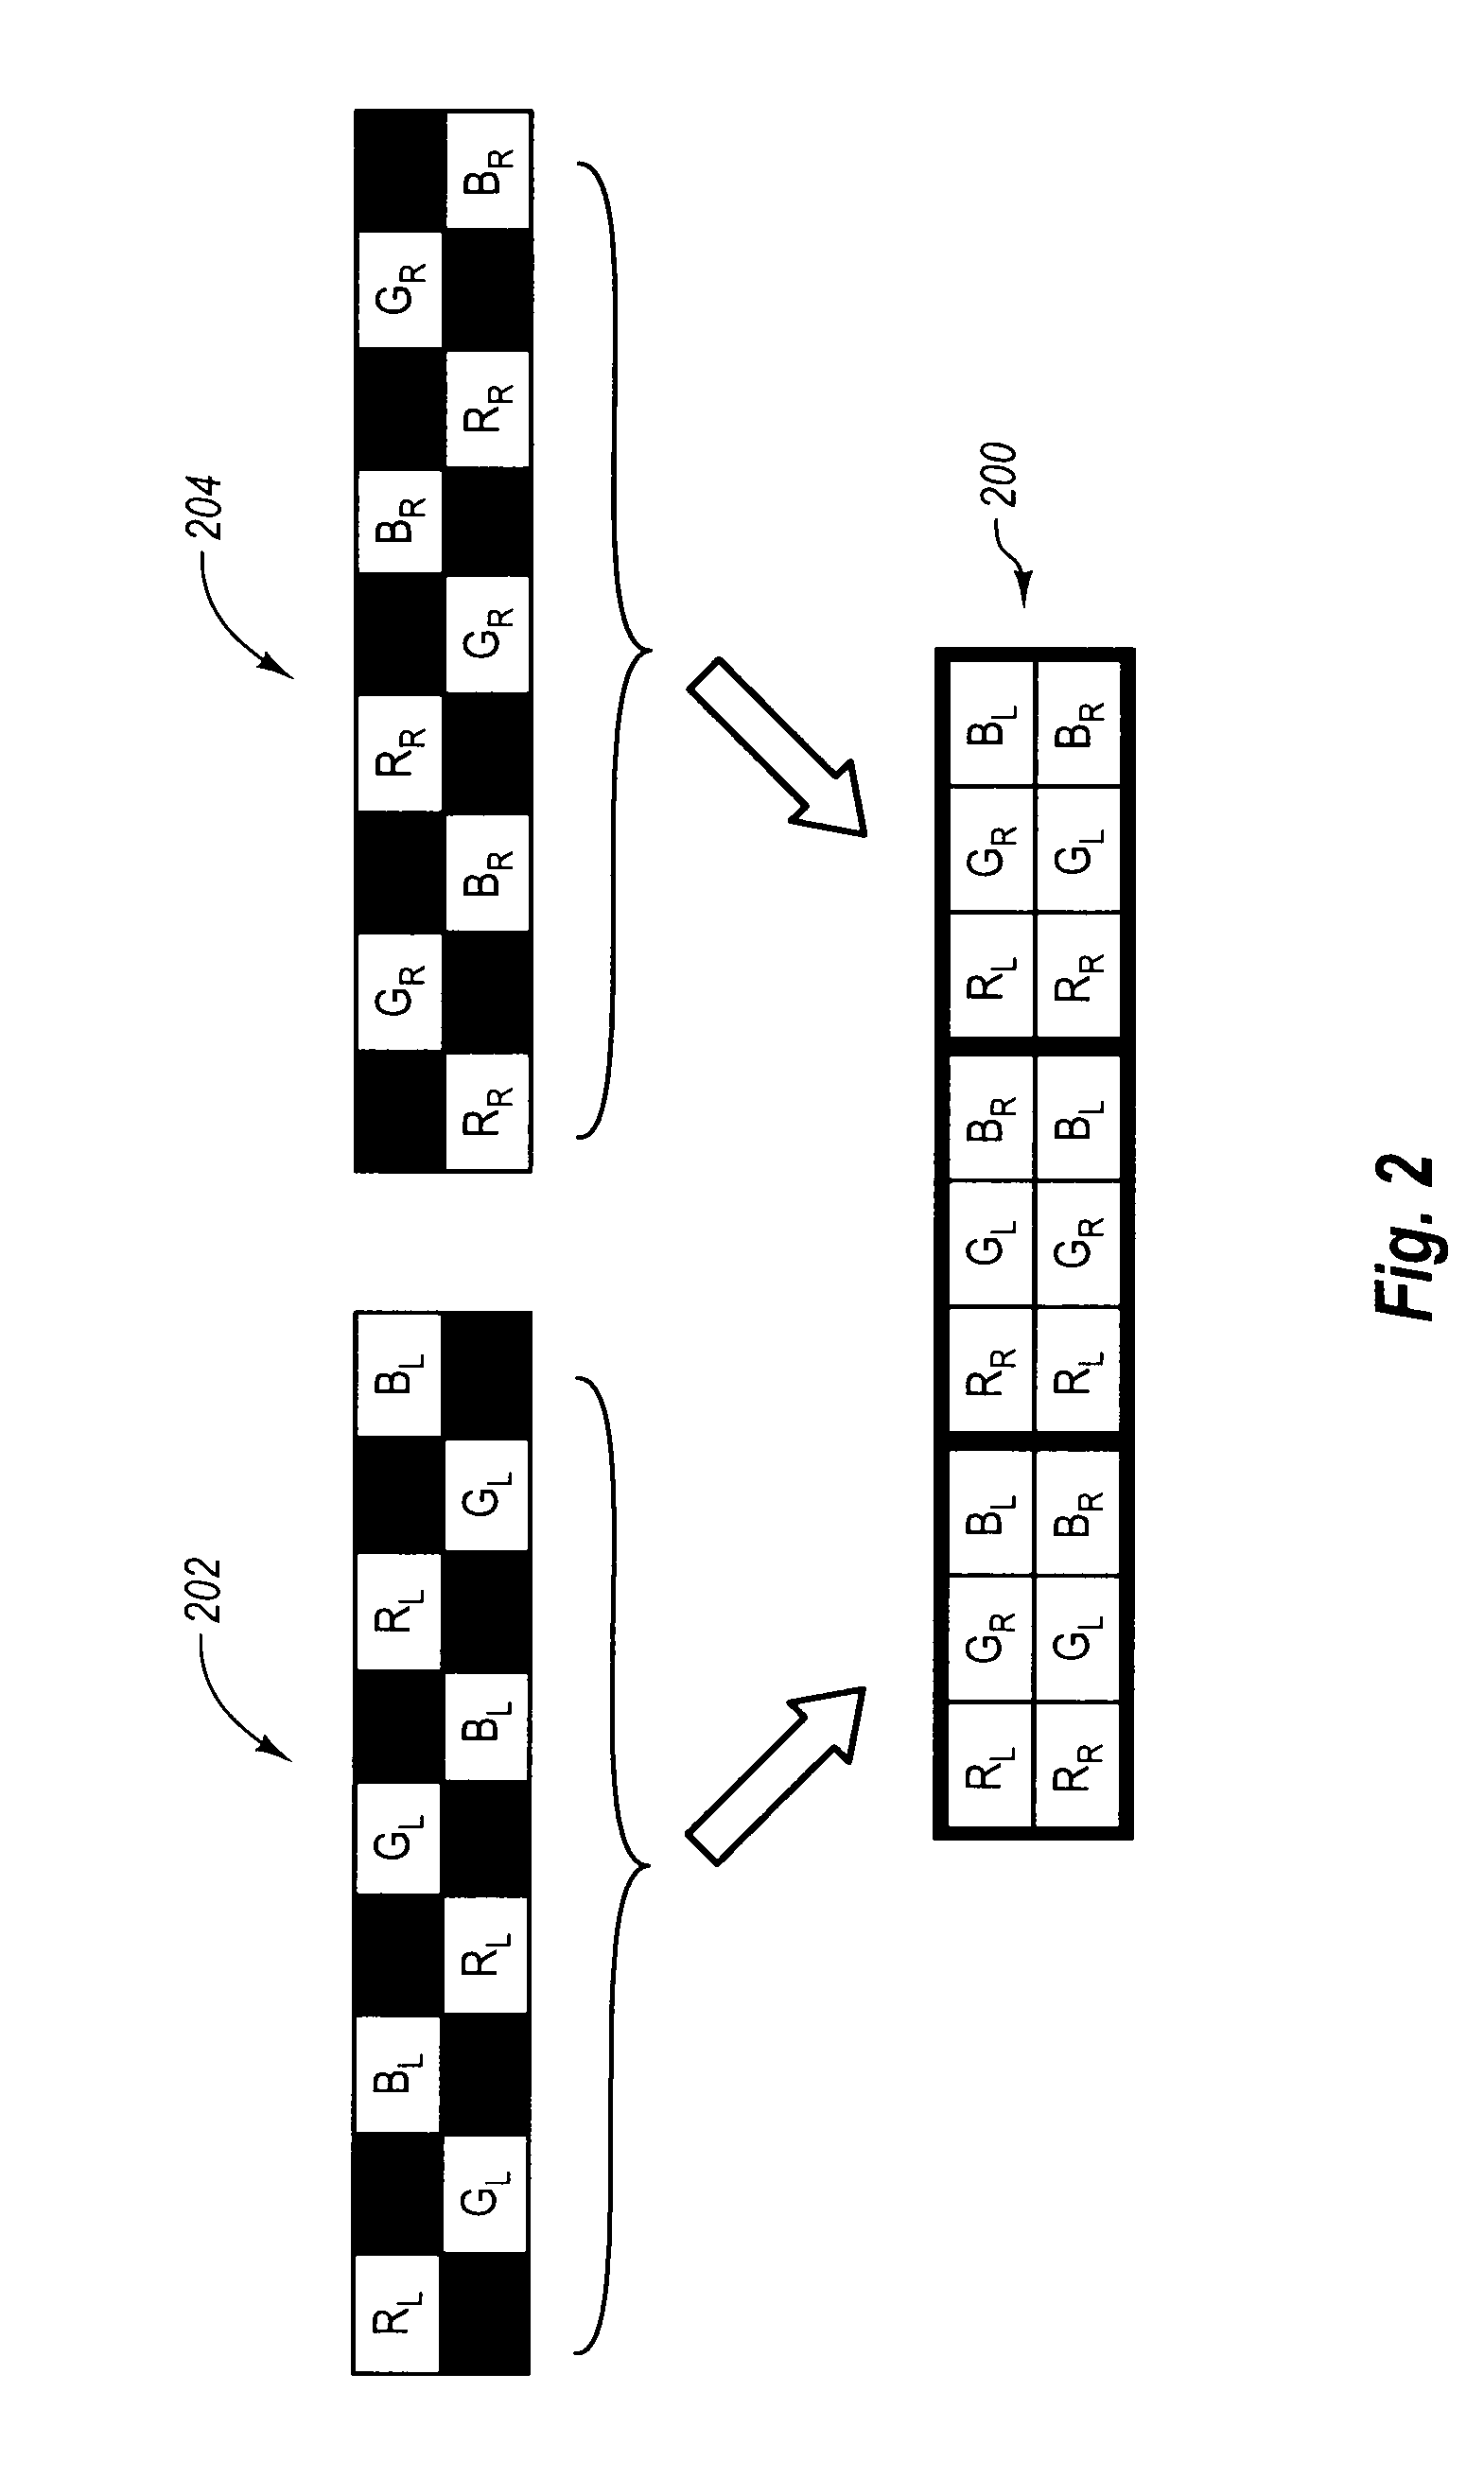 Rendering A Multiple Viewpoint Image Into A Single Frame Buffer Using Off-Screen Rendering Surfaces